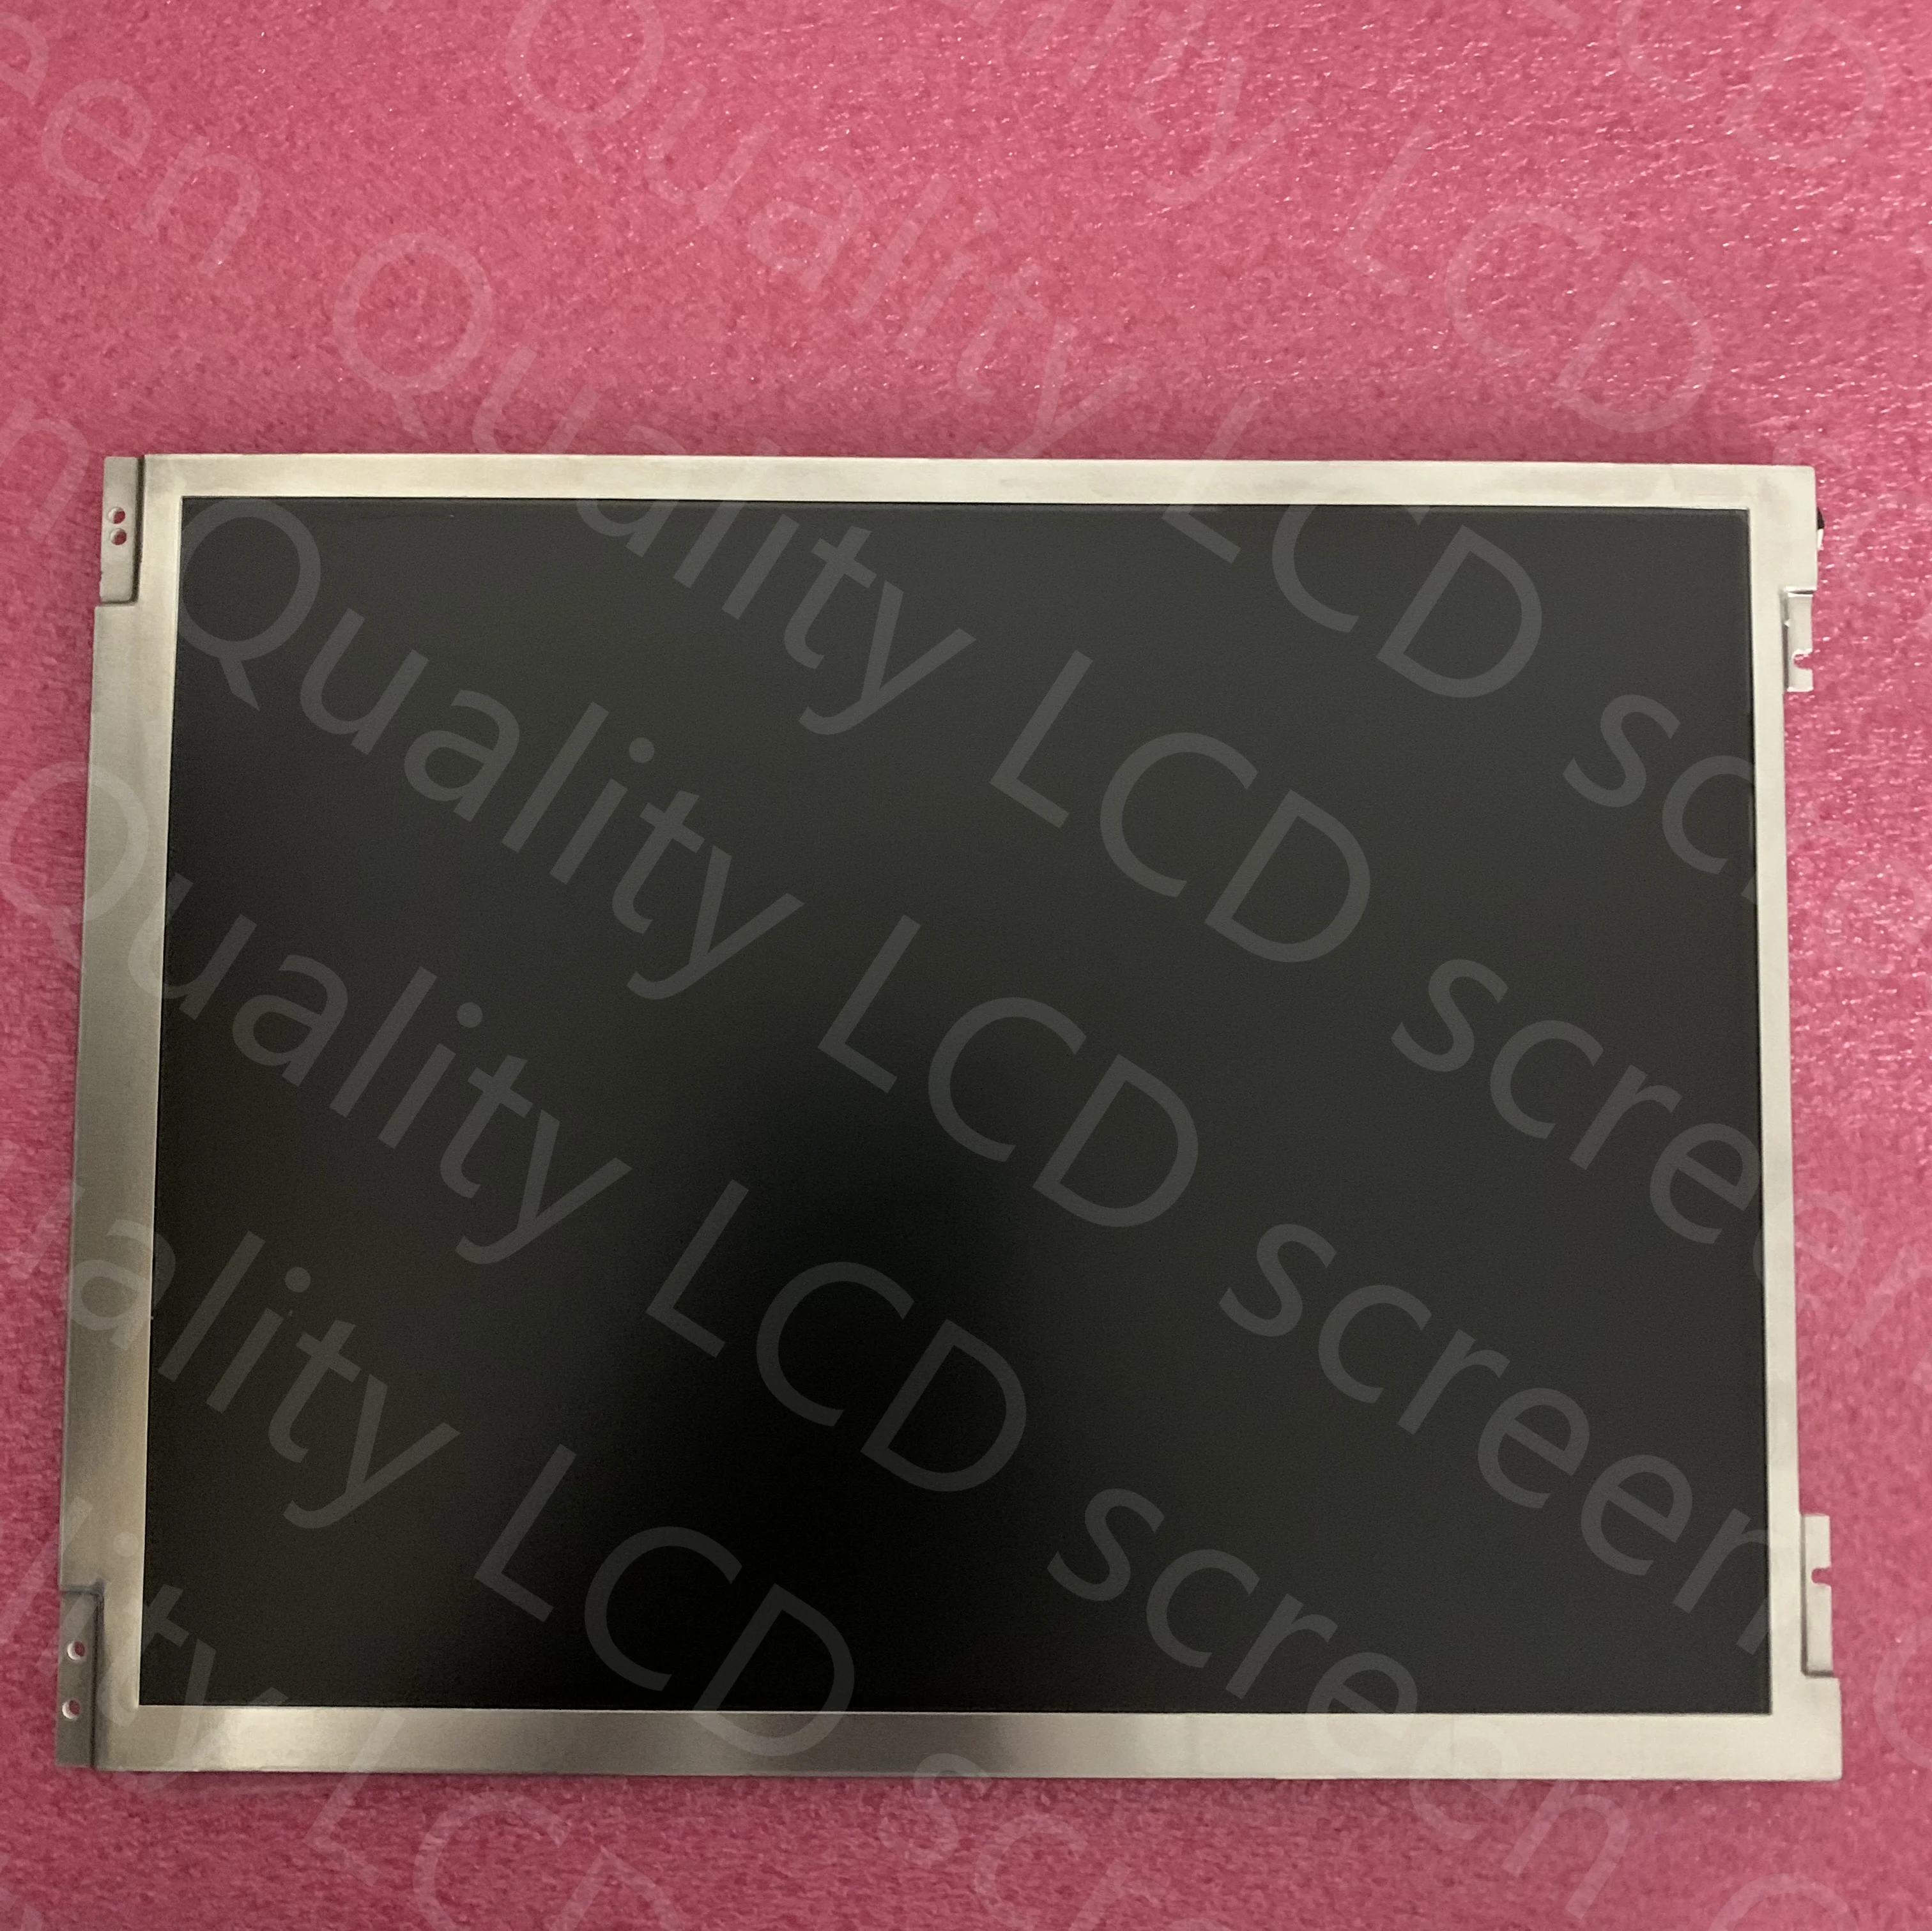 Applicable to , TS104SAALC01-00 BA104S01-100, BA104S01-200, TM104SDH01,  800*600 AUO LCD display 180 days warranty